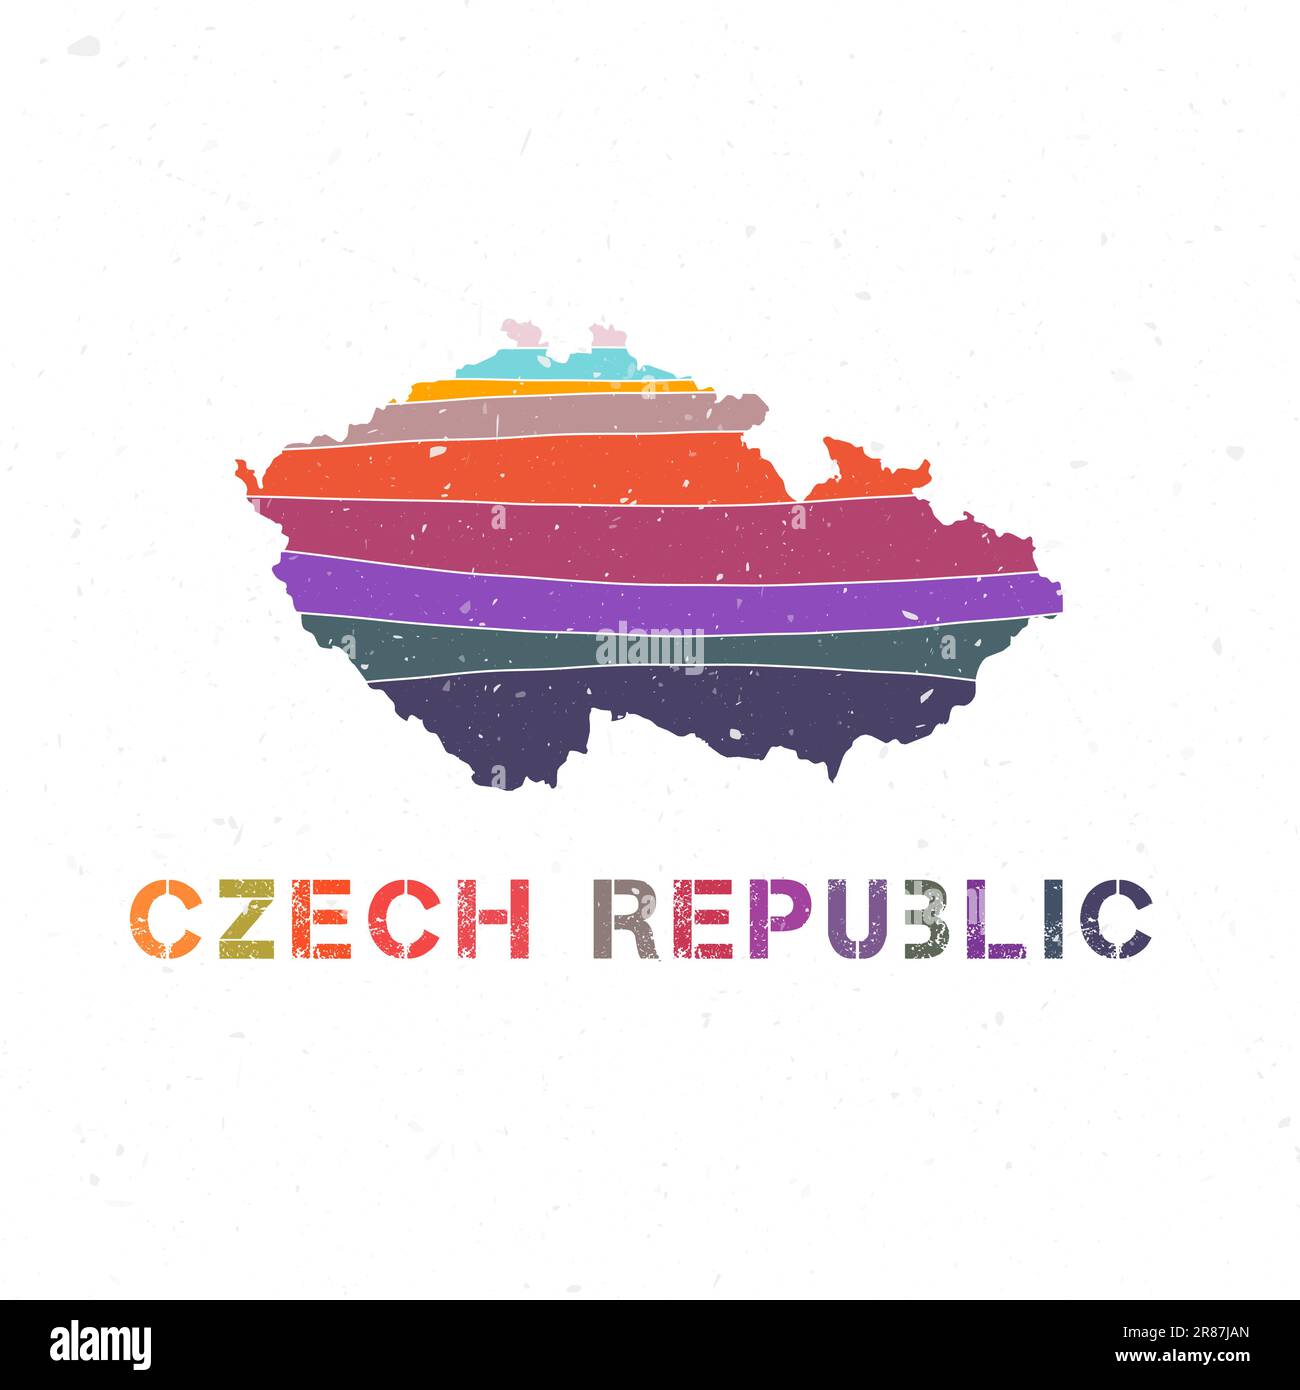 Czech Republic map design. Shape of the country with beautiful geometric waves and grunge texture. Appealing vector illustration. Stock Vector